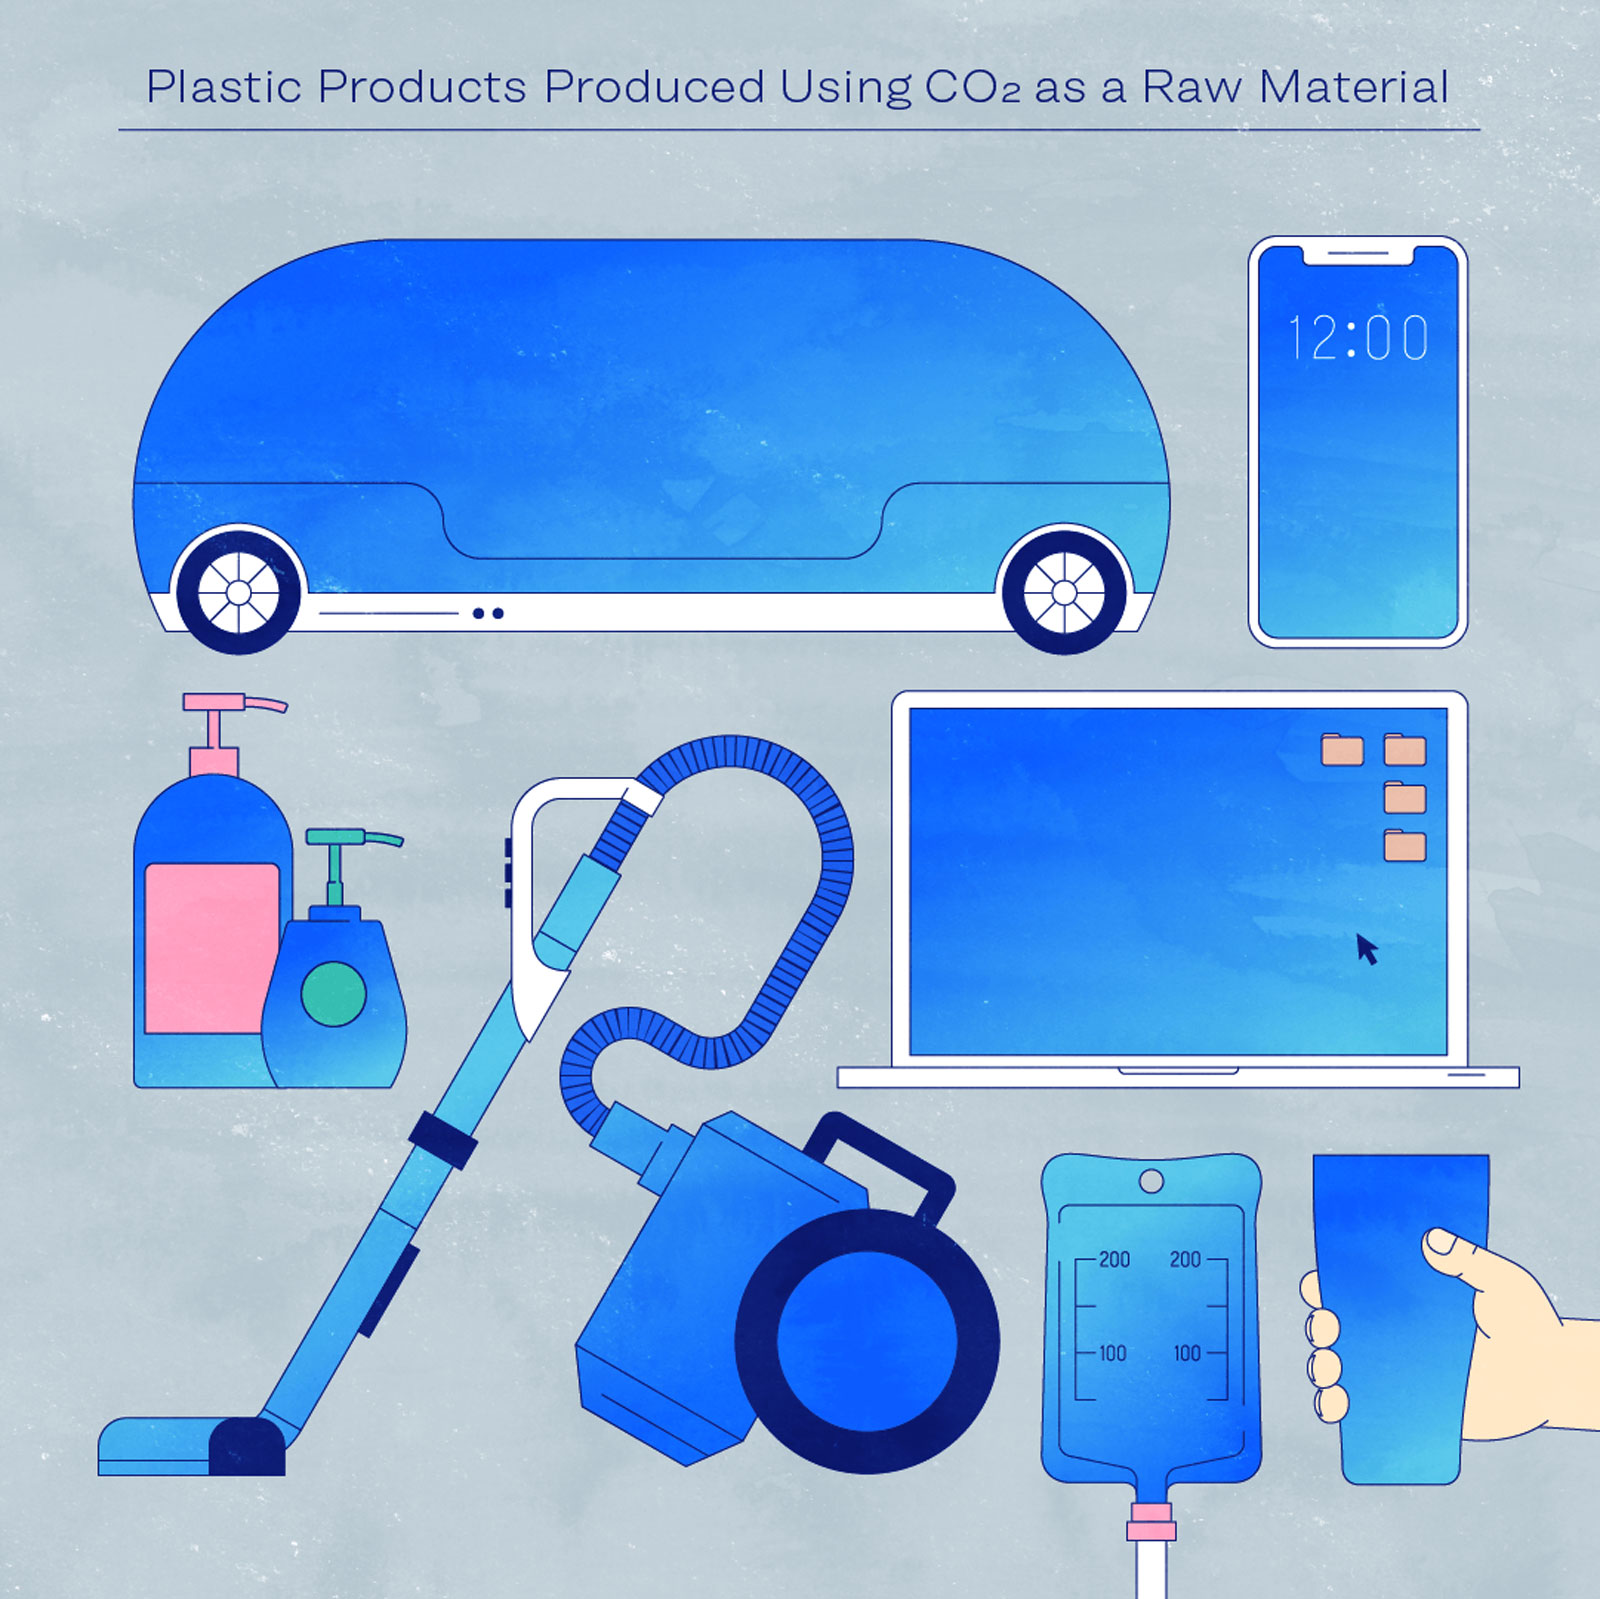 Plastic Product Produced Using CO₂ as a Raw Material